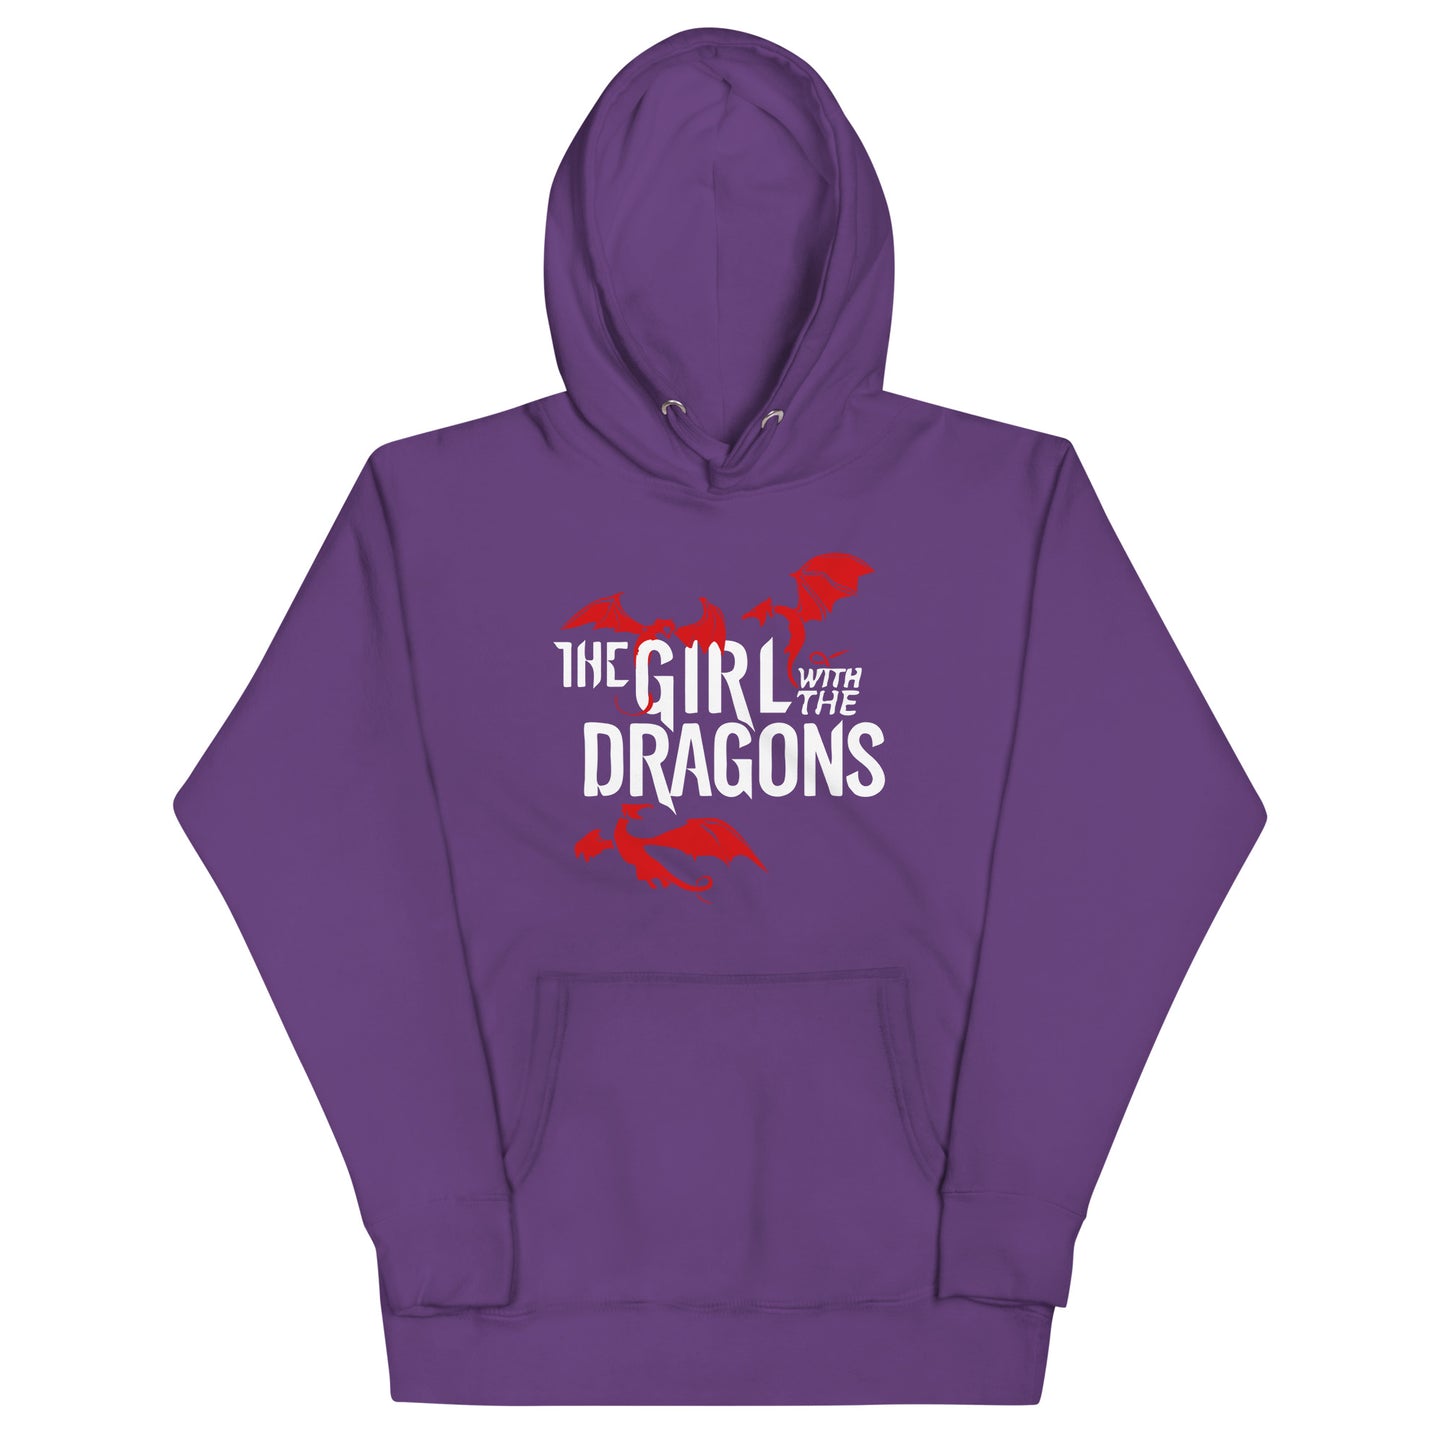 The Girl With The Dragons Unisex Hoodie